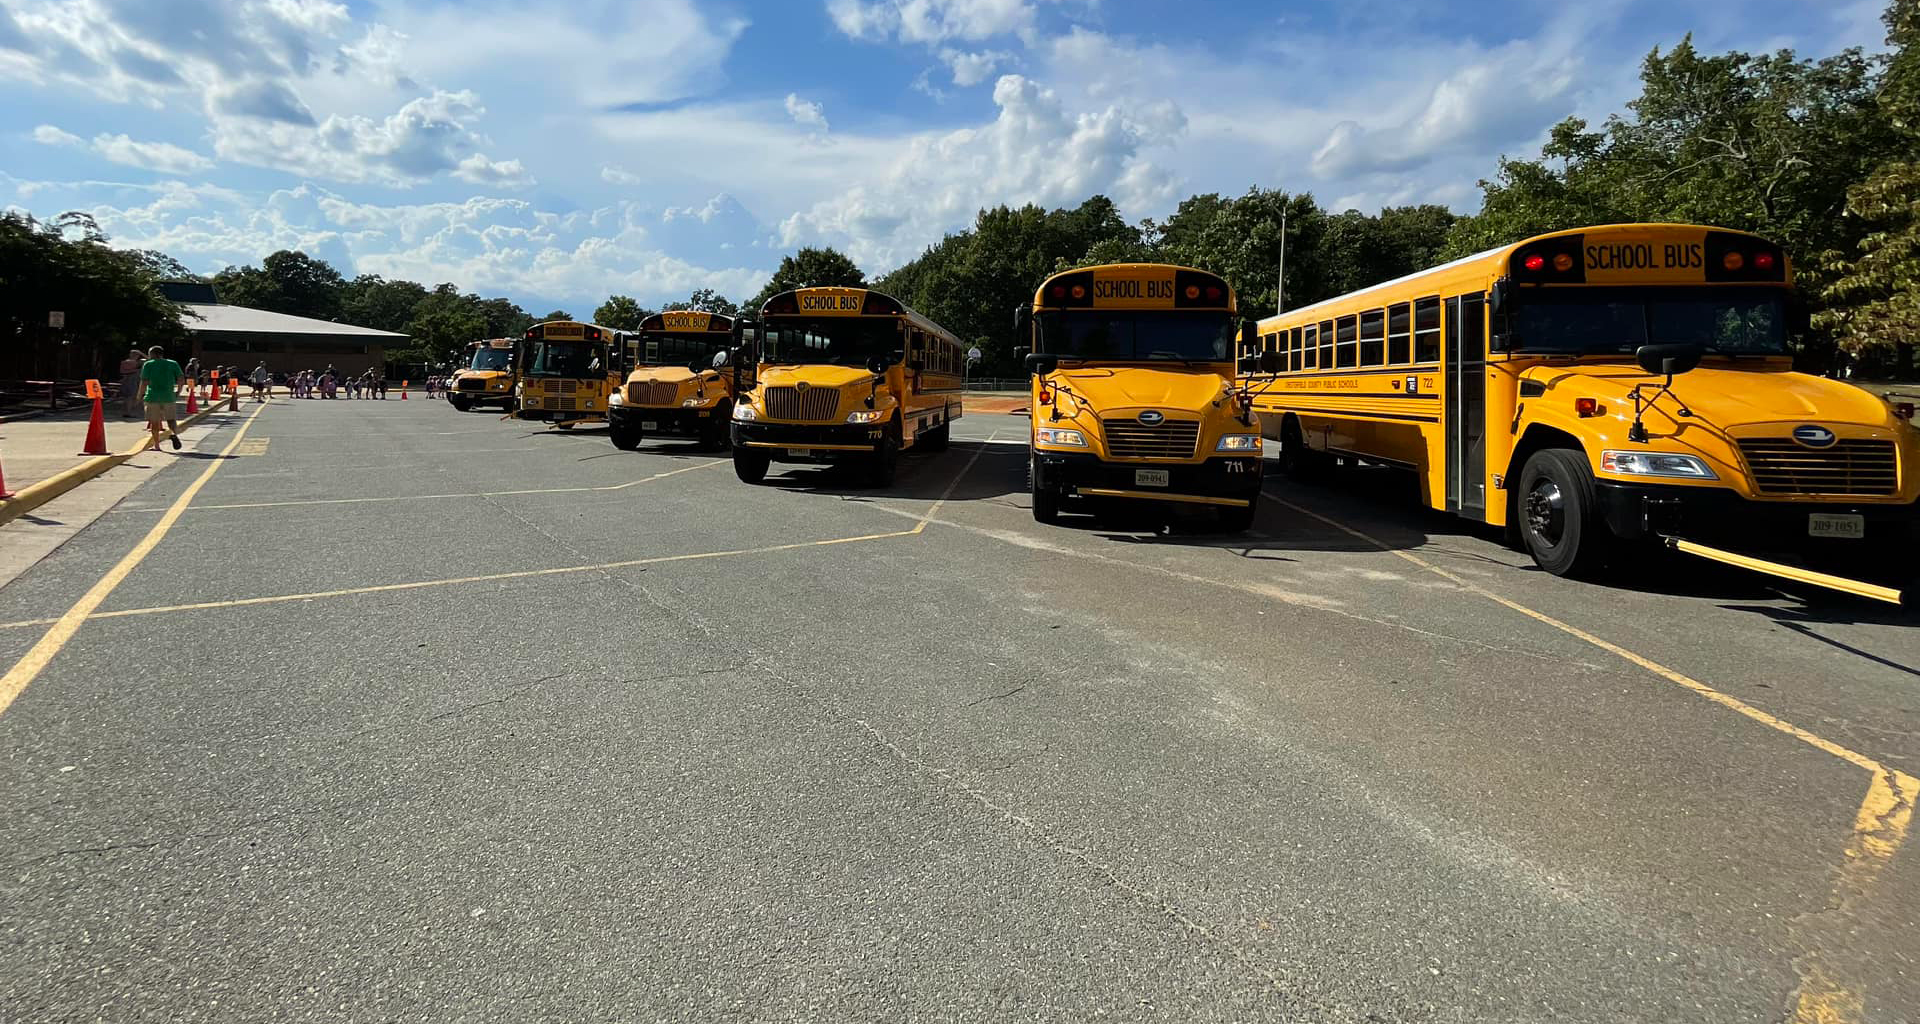 Buses lined up in front of school